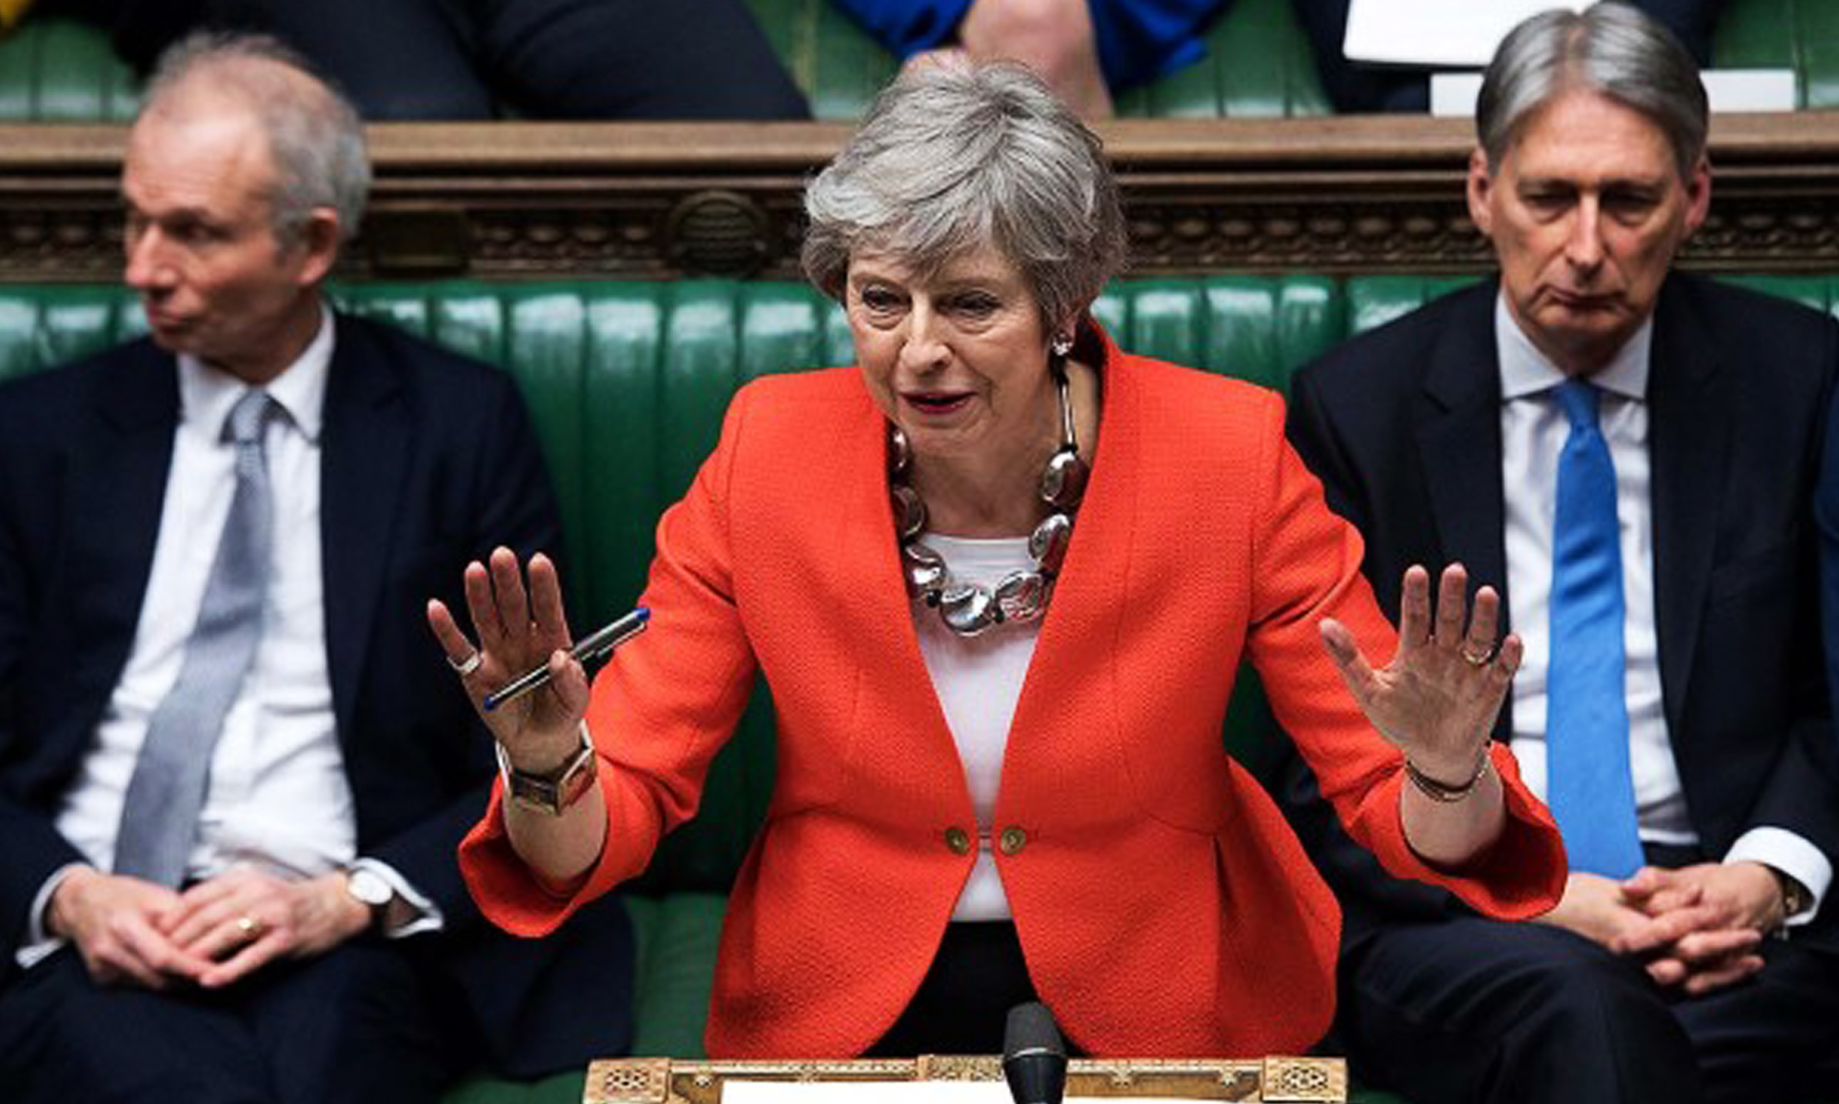 My deal or no deal, defiant UK’s PM May says in Brexit speech to the nation